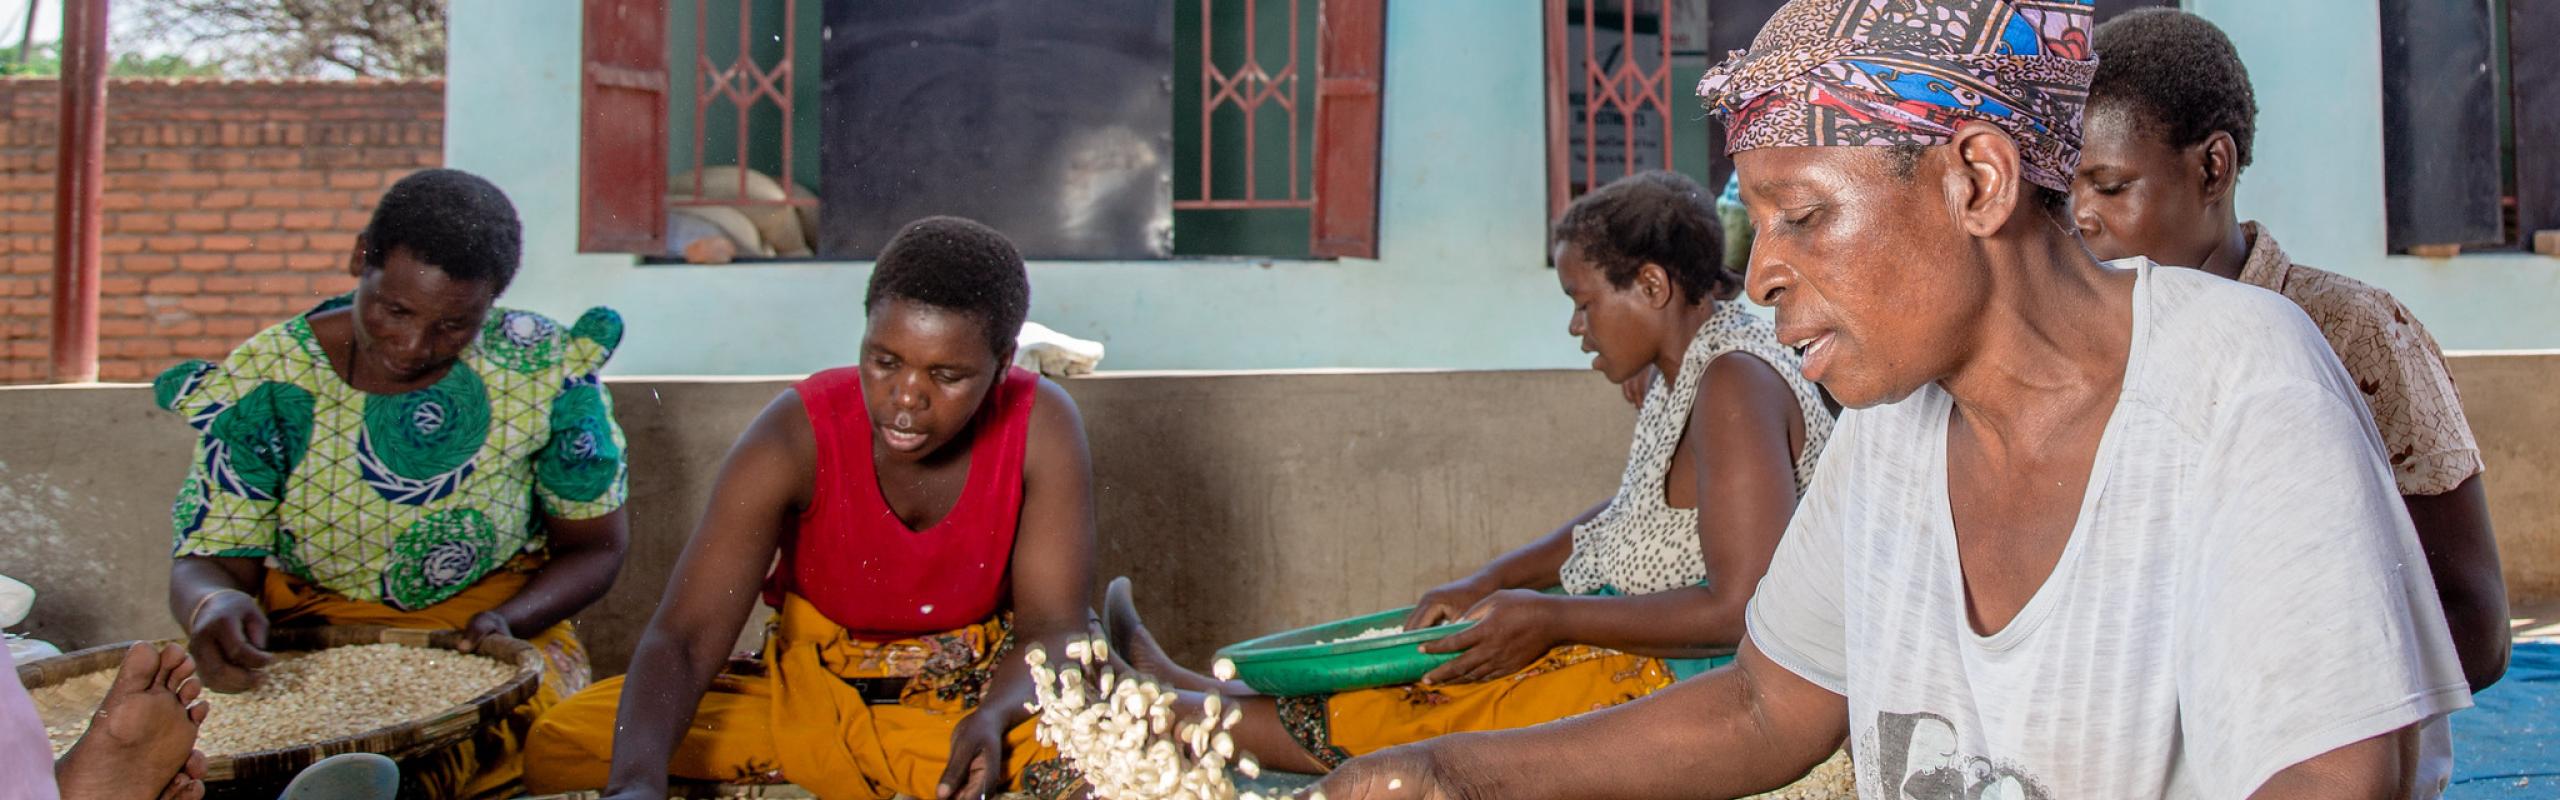 Women sorting out maize seed at the Mgom’mera Seed Company warehouse in Lilongwe, Malawi.